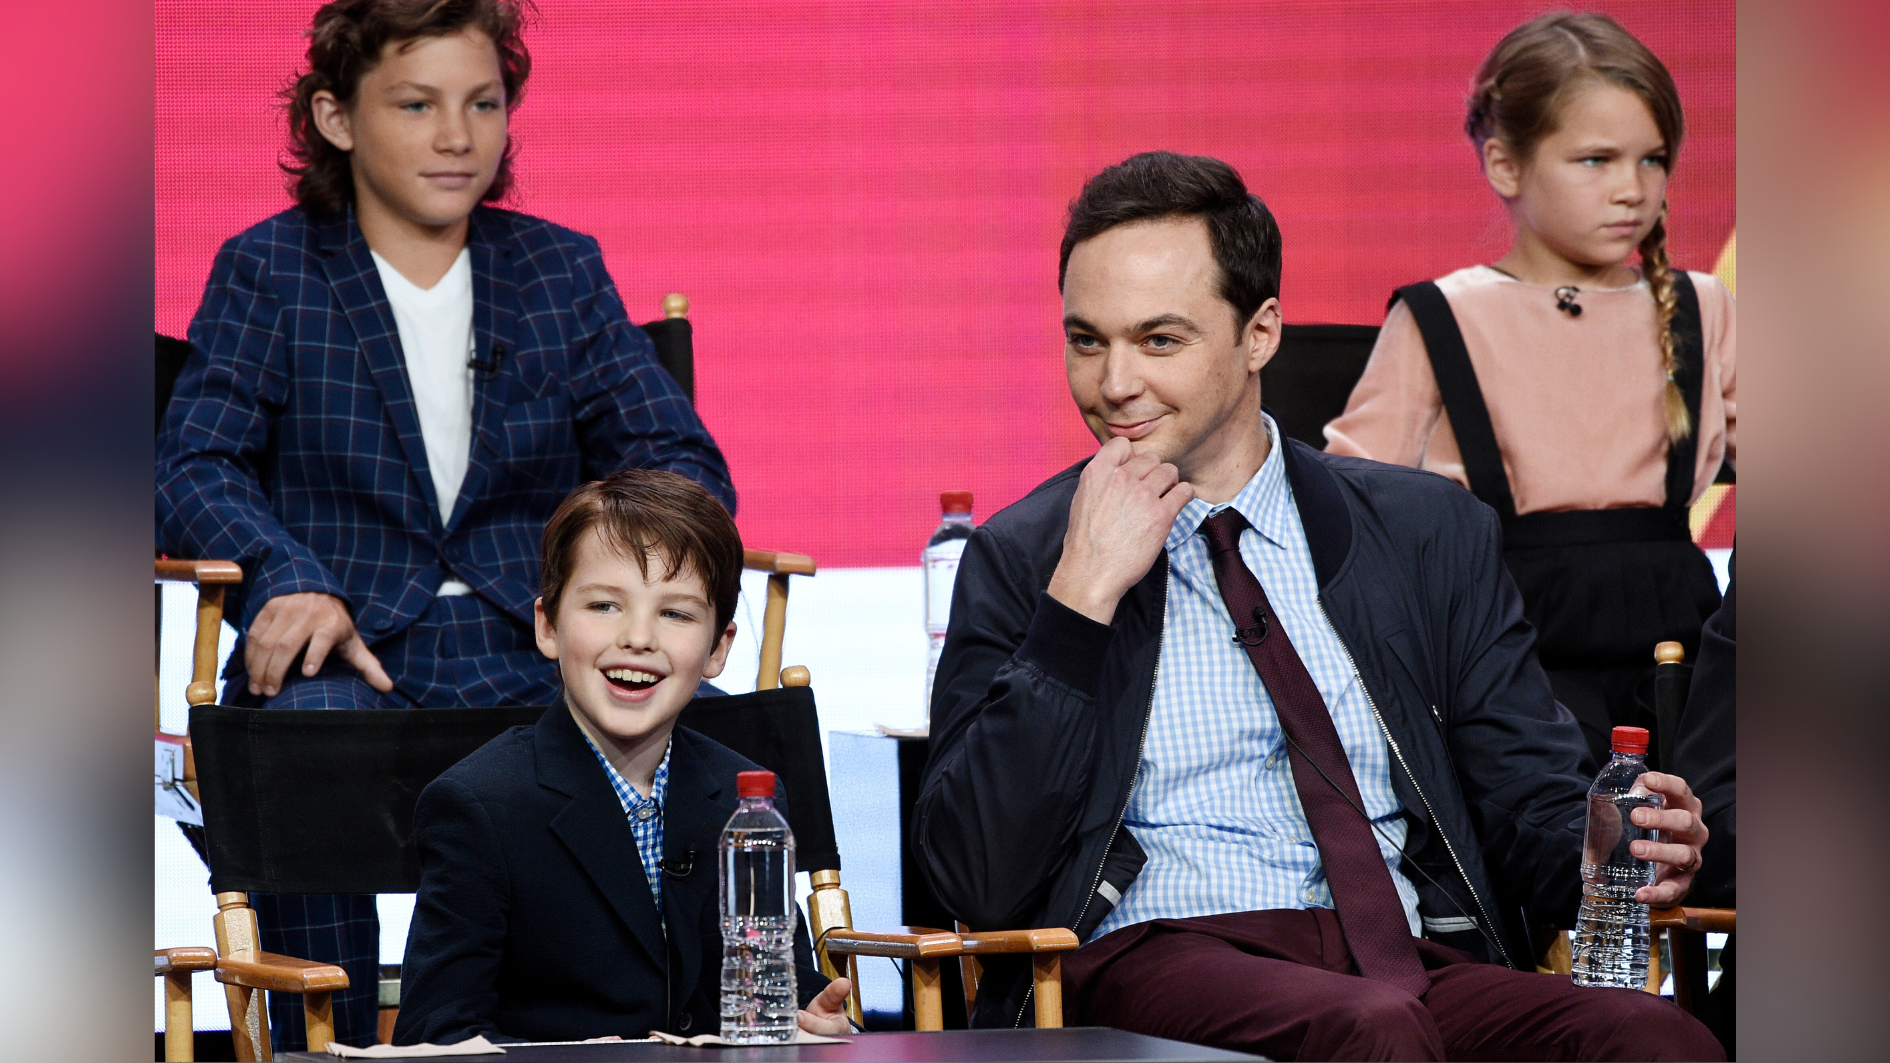 Young Sheldon: The Most Skippable Episode In Season 4